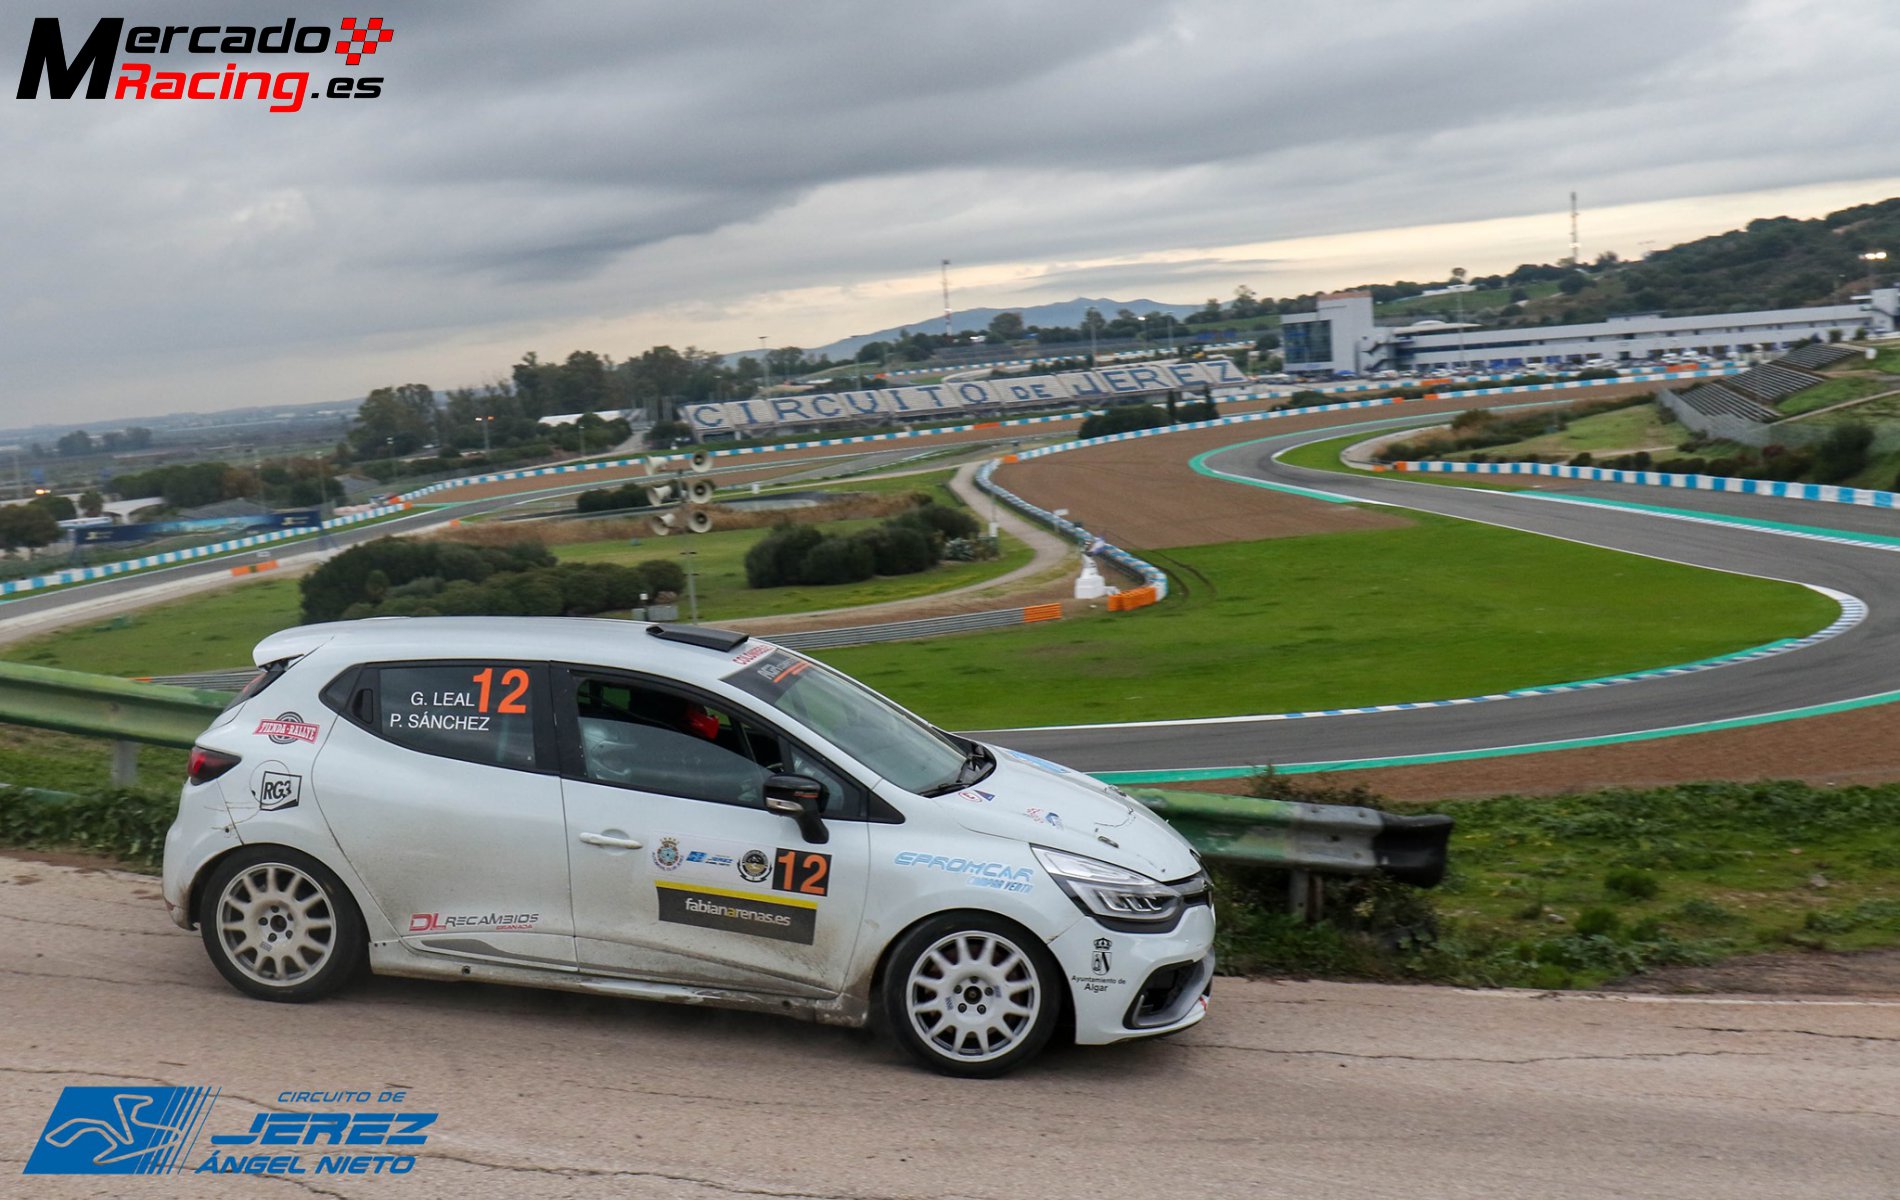 Agr competicion vende renault clio iv cup rallyes